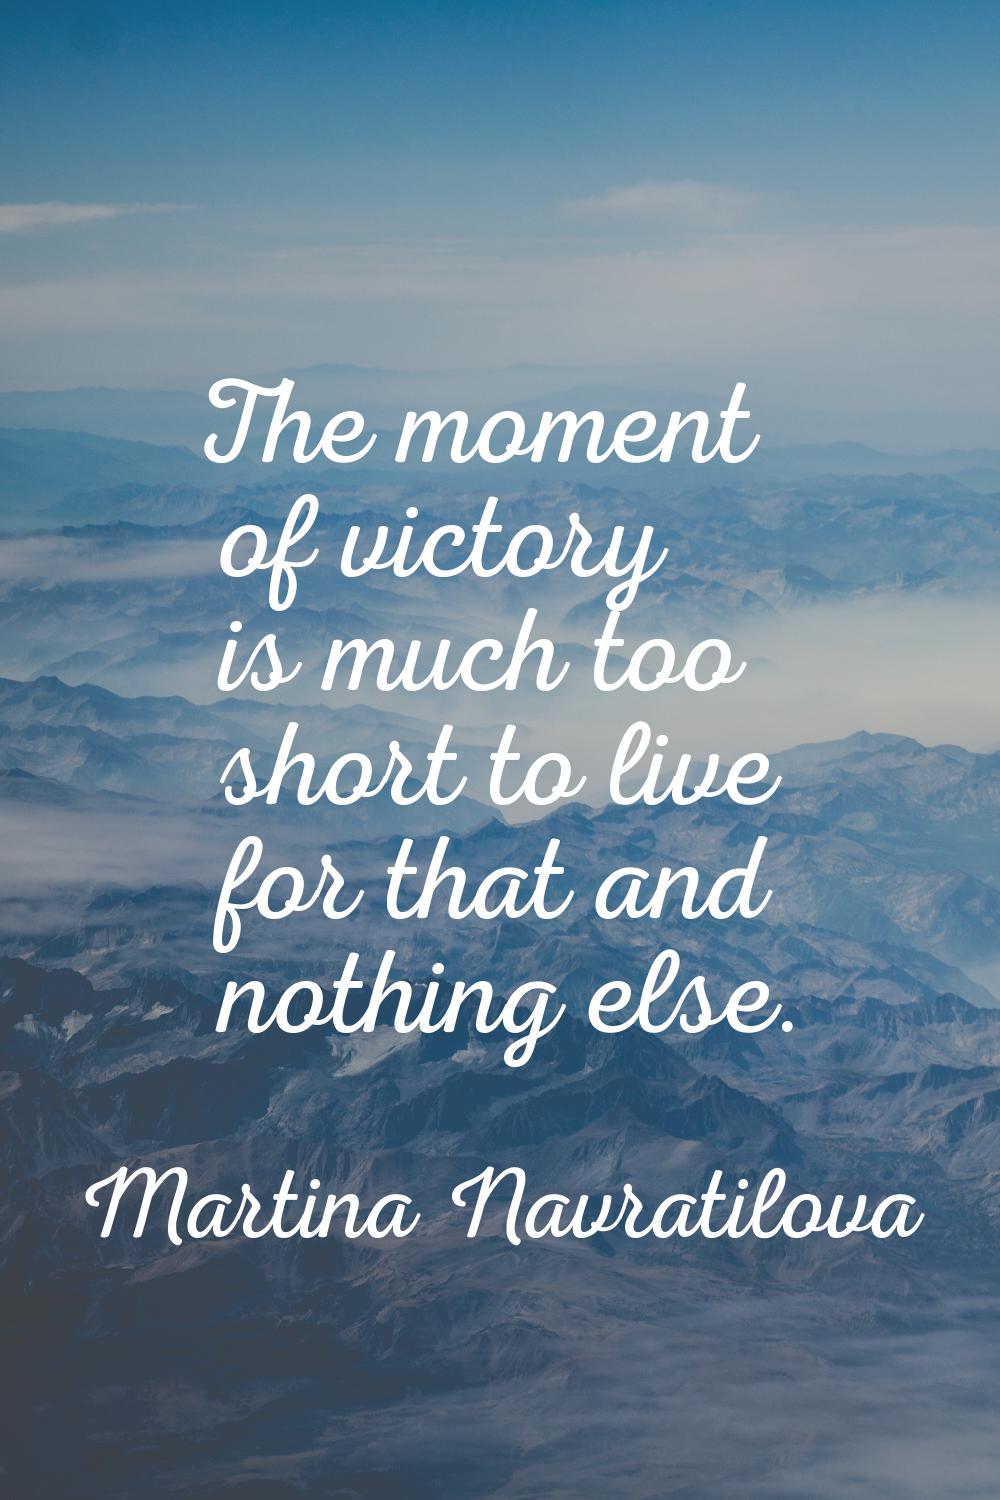 The moment of victory is much too short to live for that and nothing else.